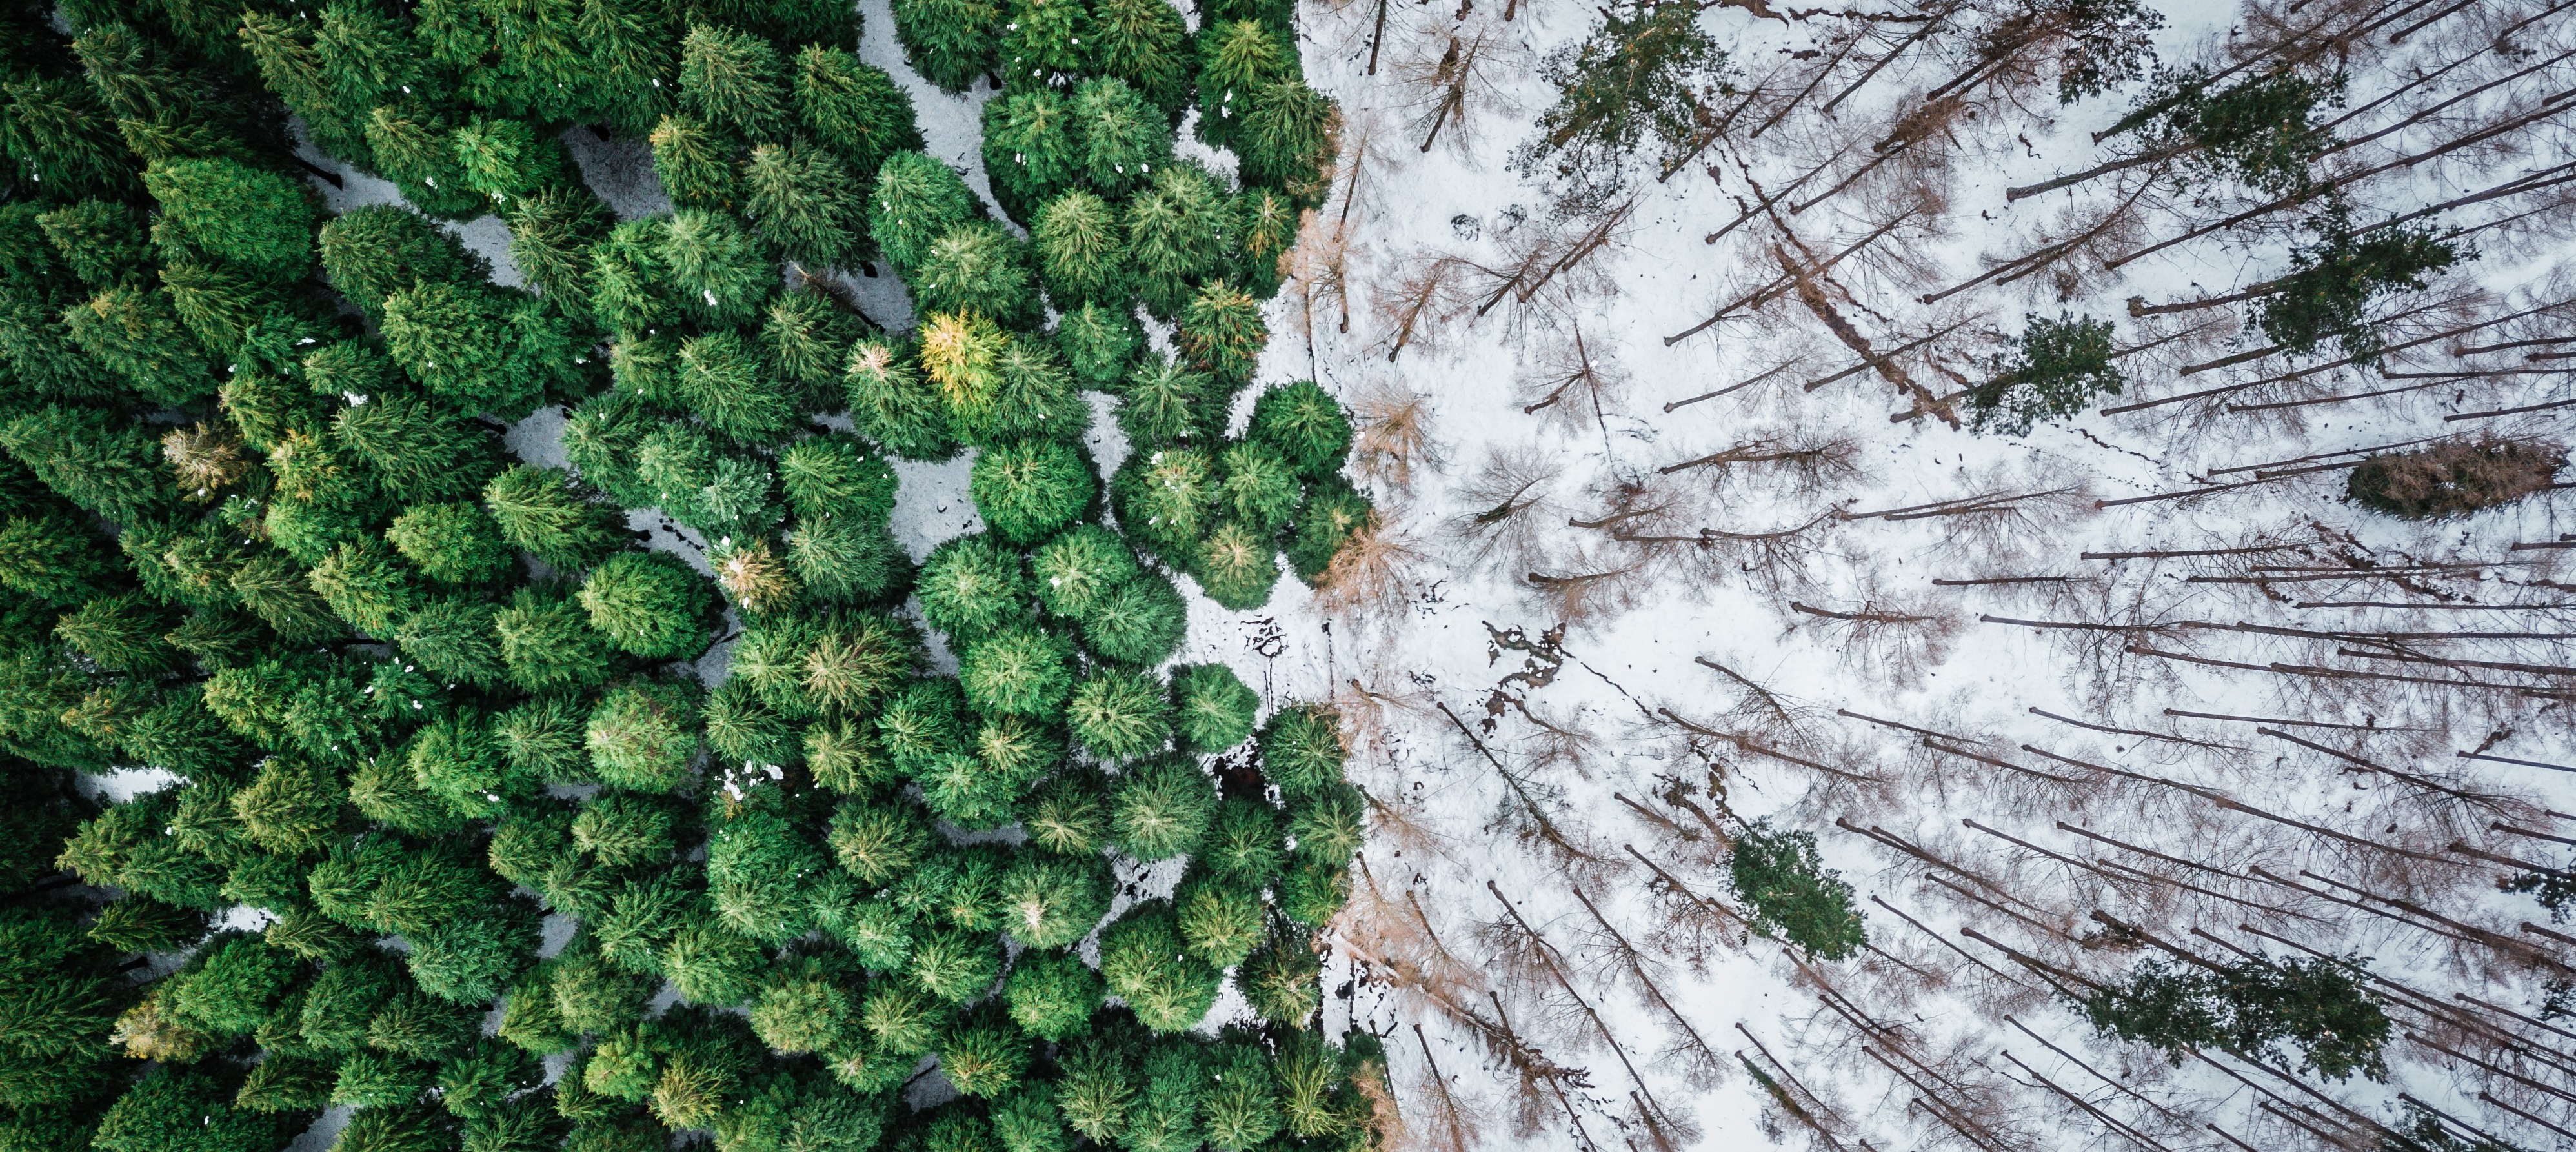 aerial view of forest with bright evergreen trees on one side and dead trees on the other side